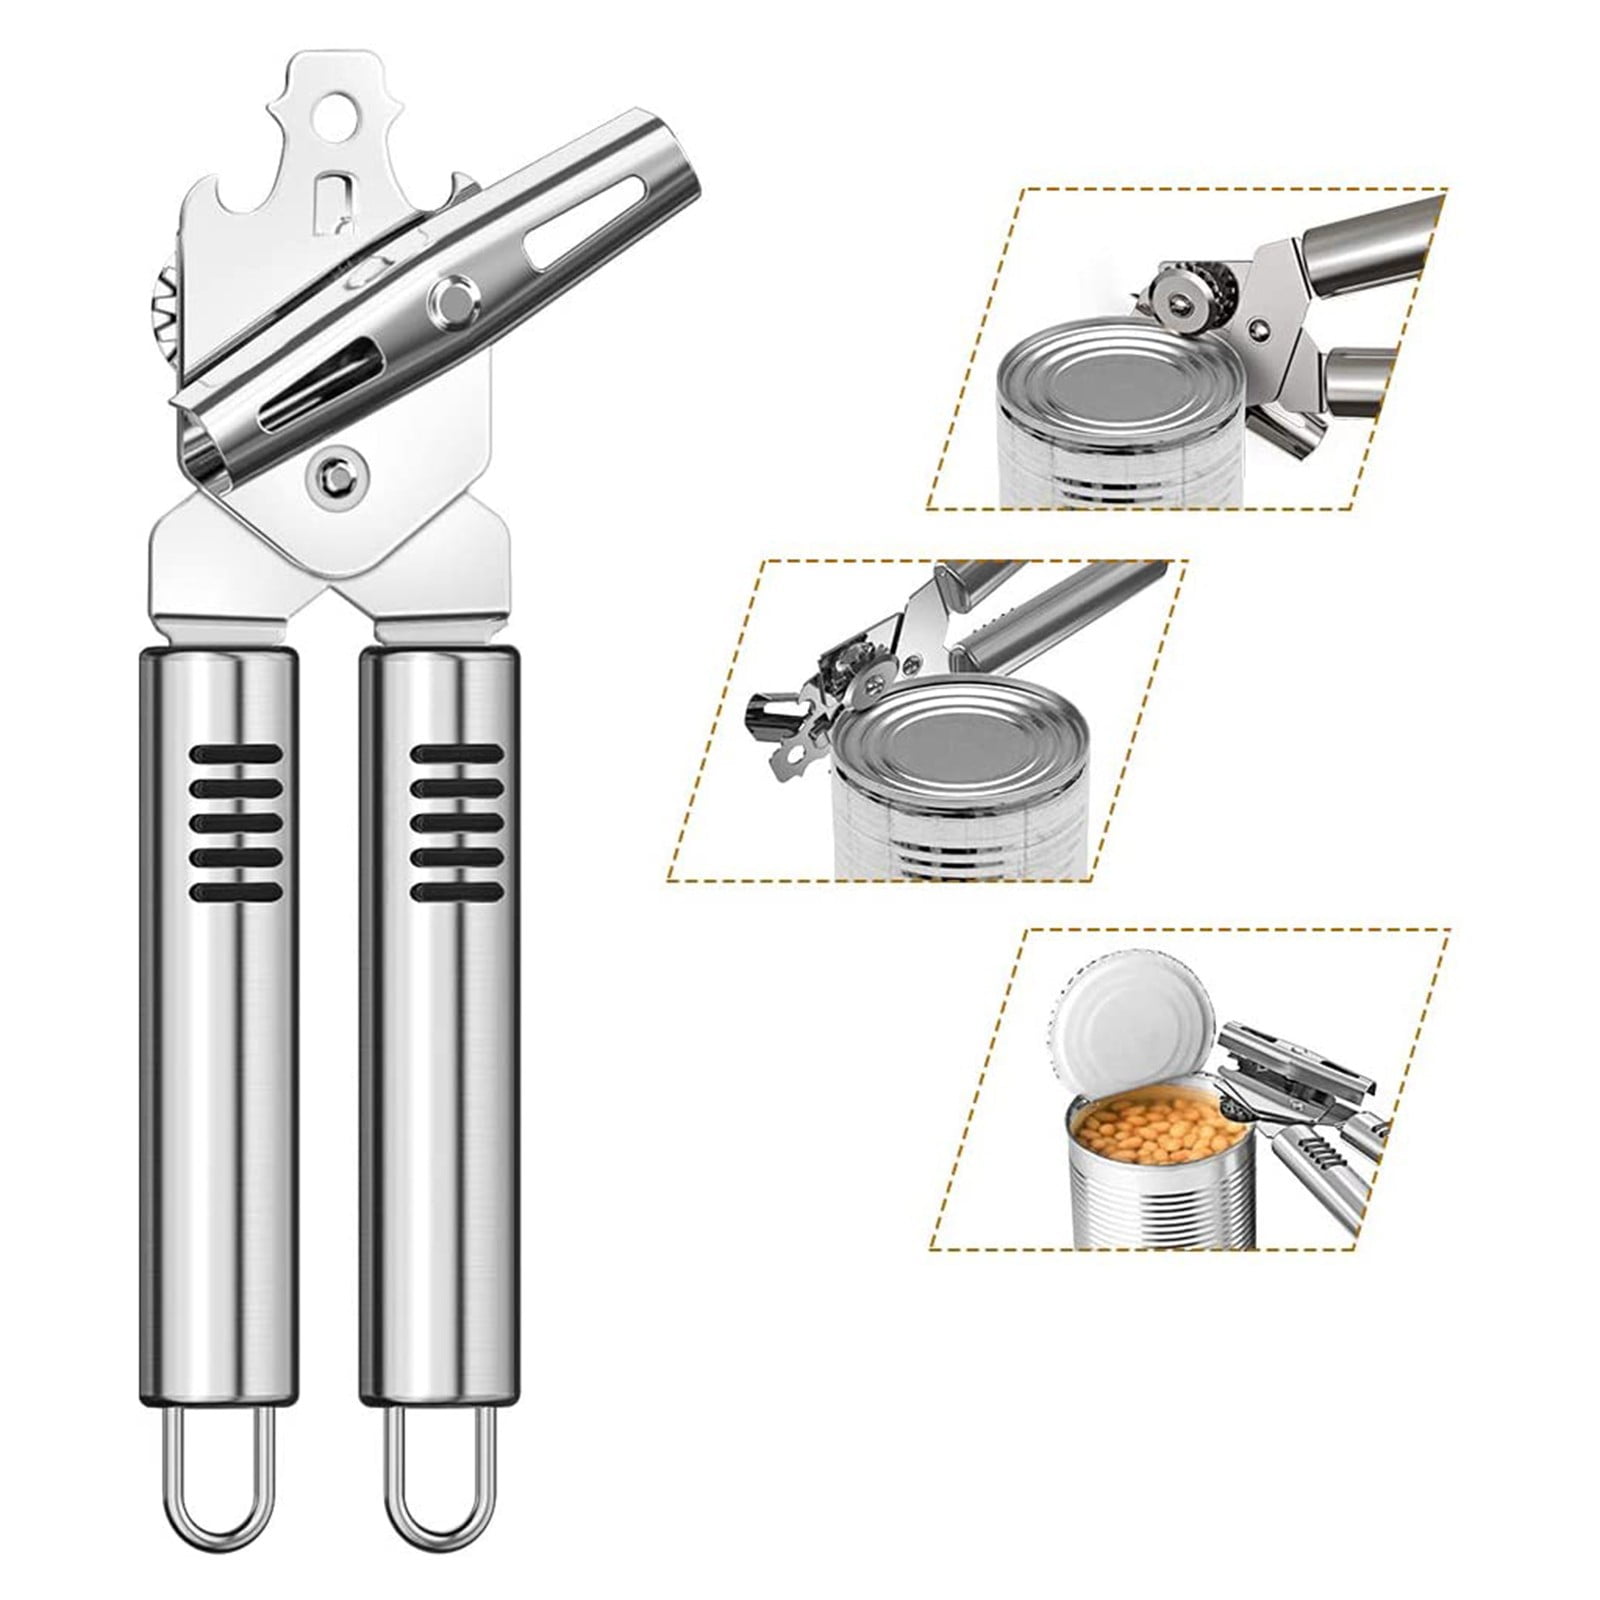 KitchenAid Multifuntion Can Opener White W/ Bottle Opener Stainless Steel Blade 